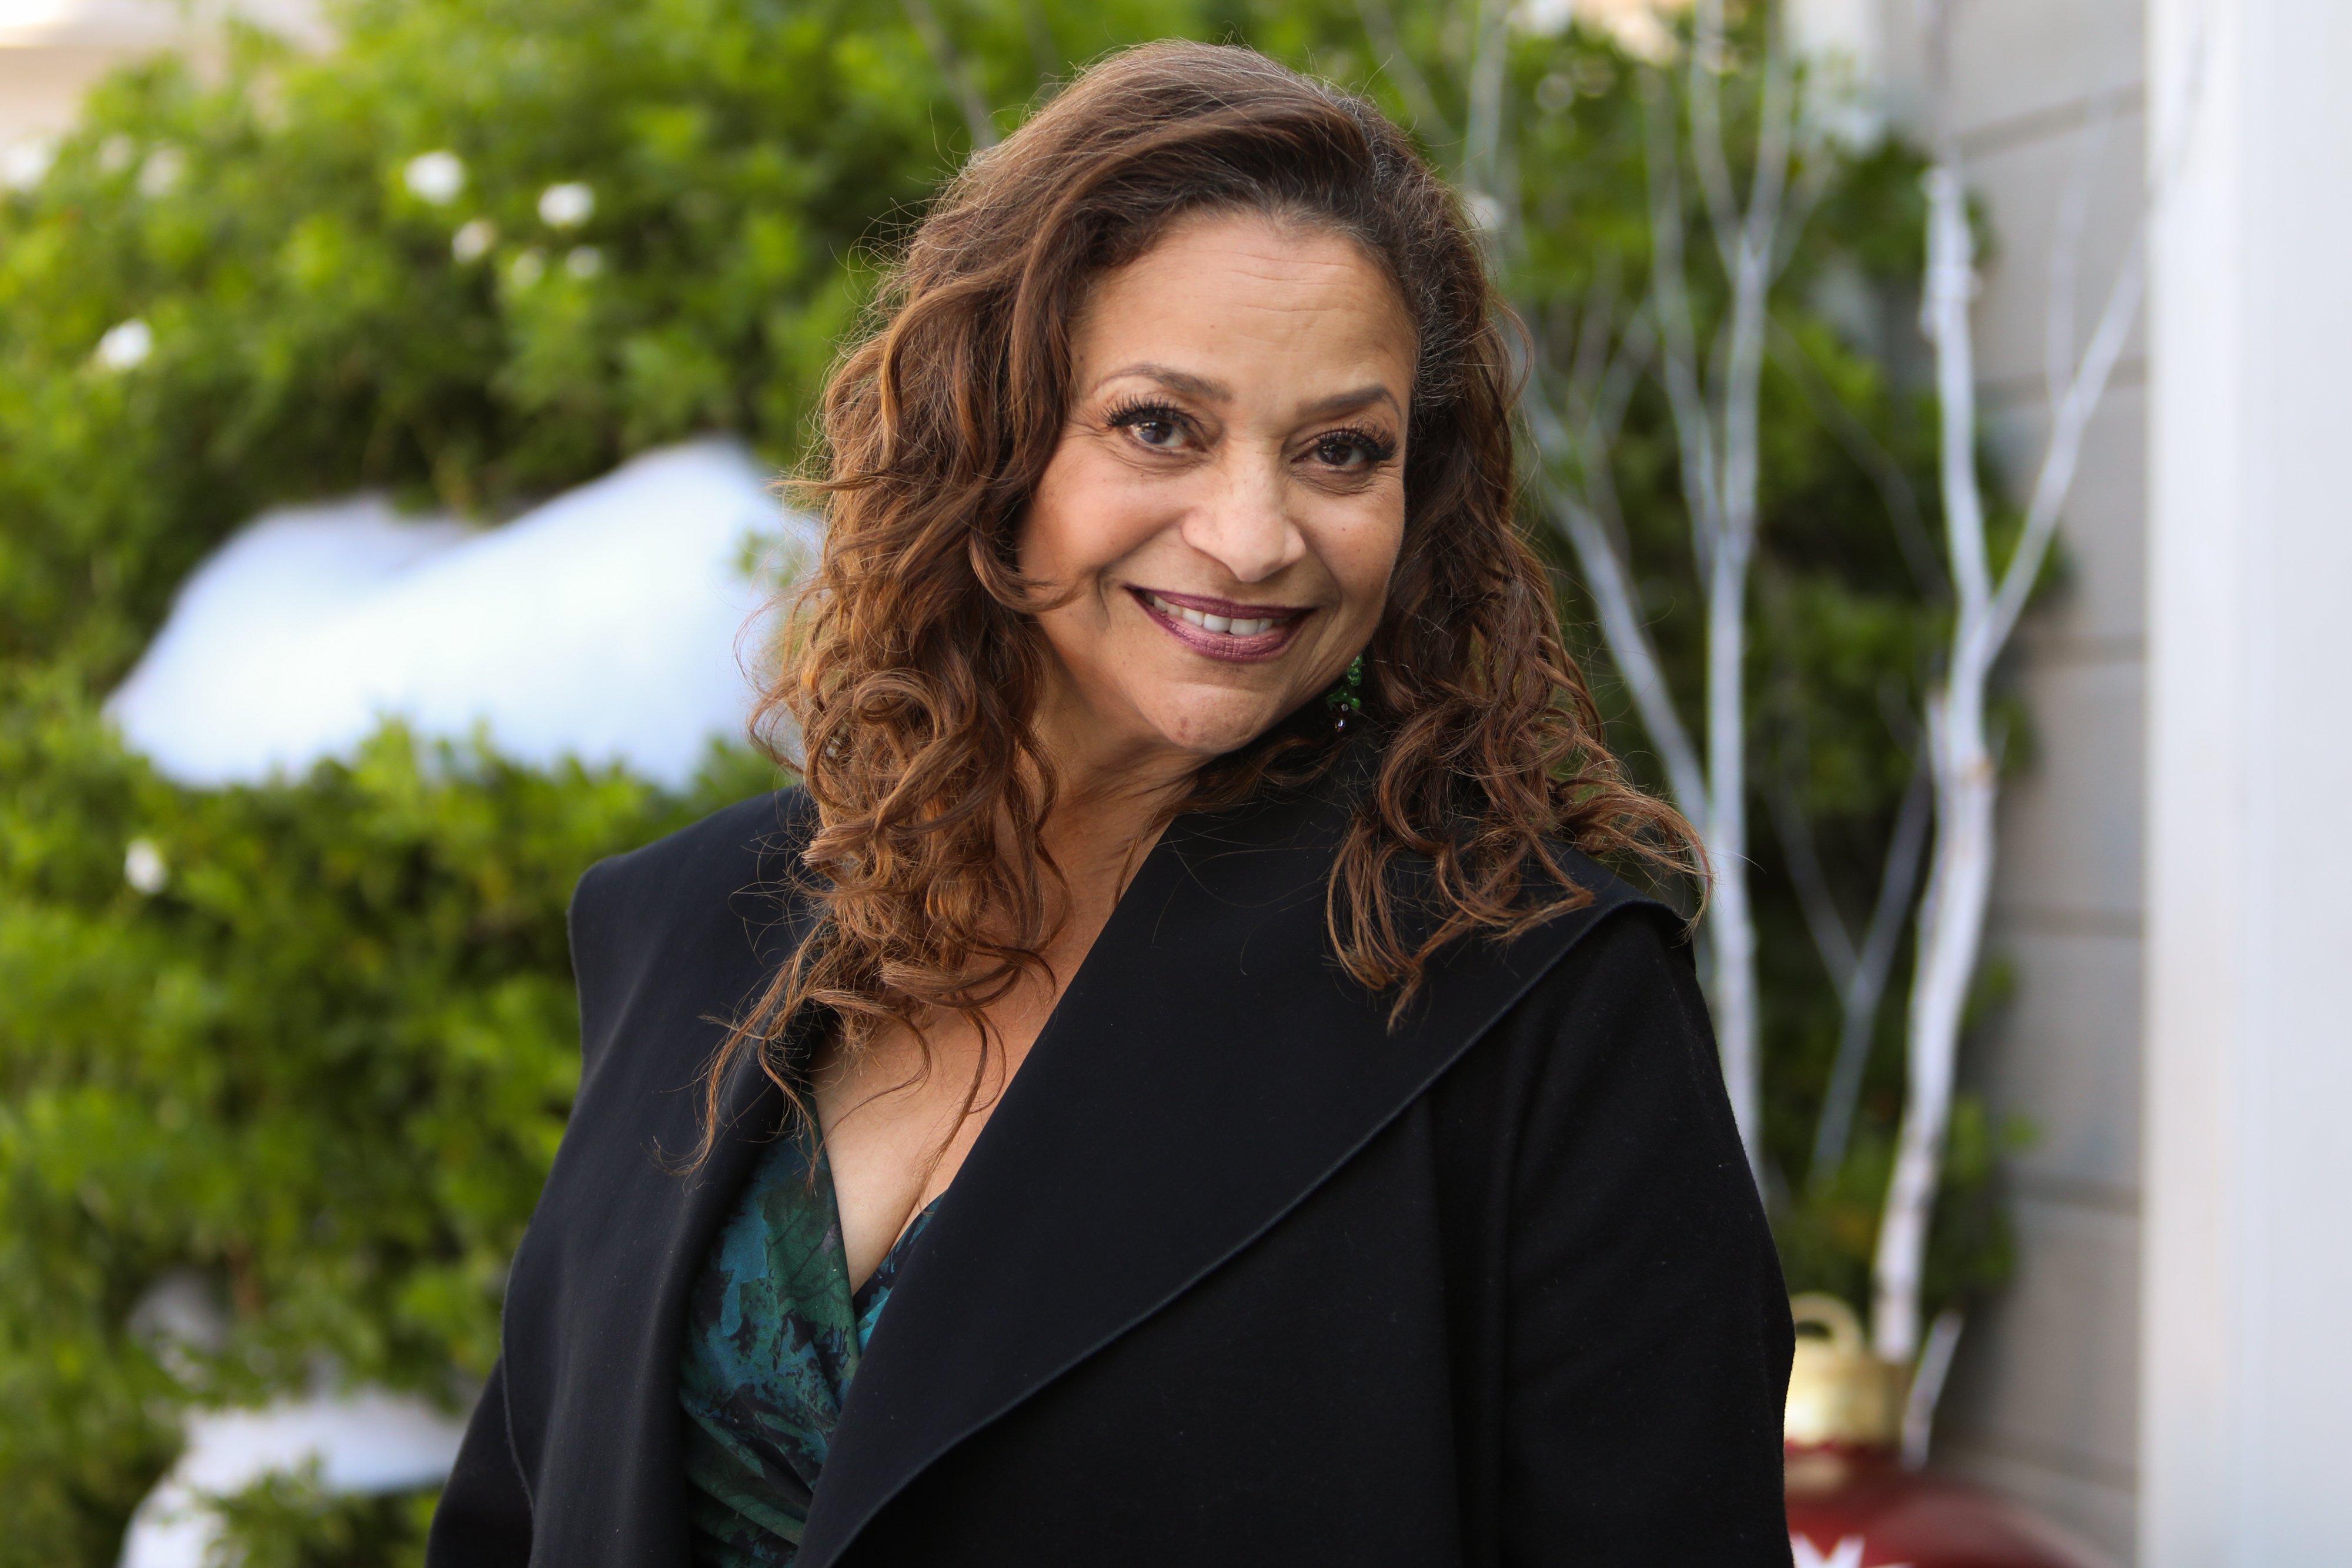 Debbie Allen visits Hallmark Channel's "Home & Family" at Universal Studios Hollywood on November 25, 2019. | Source: Getty Images